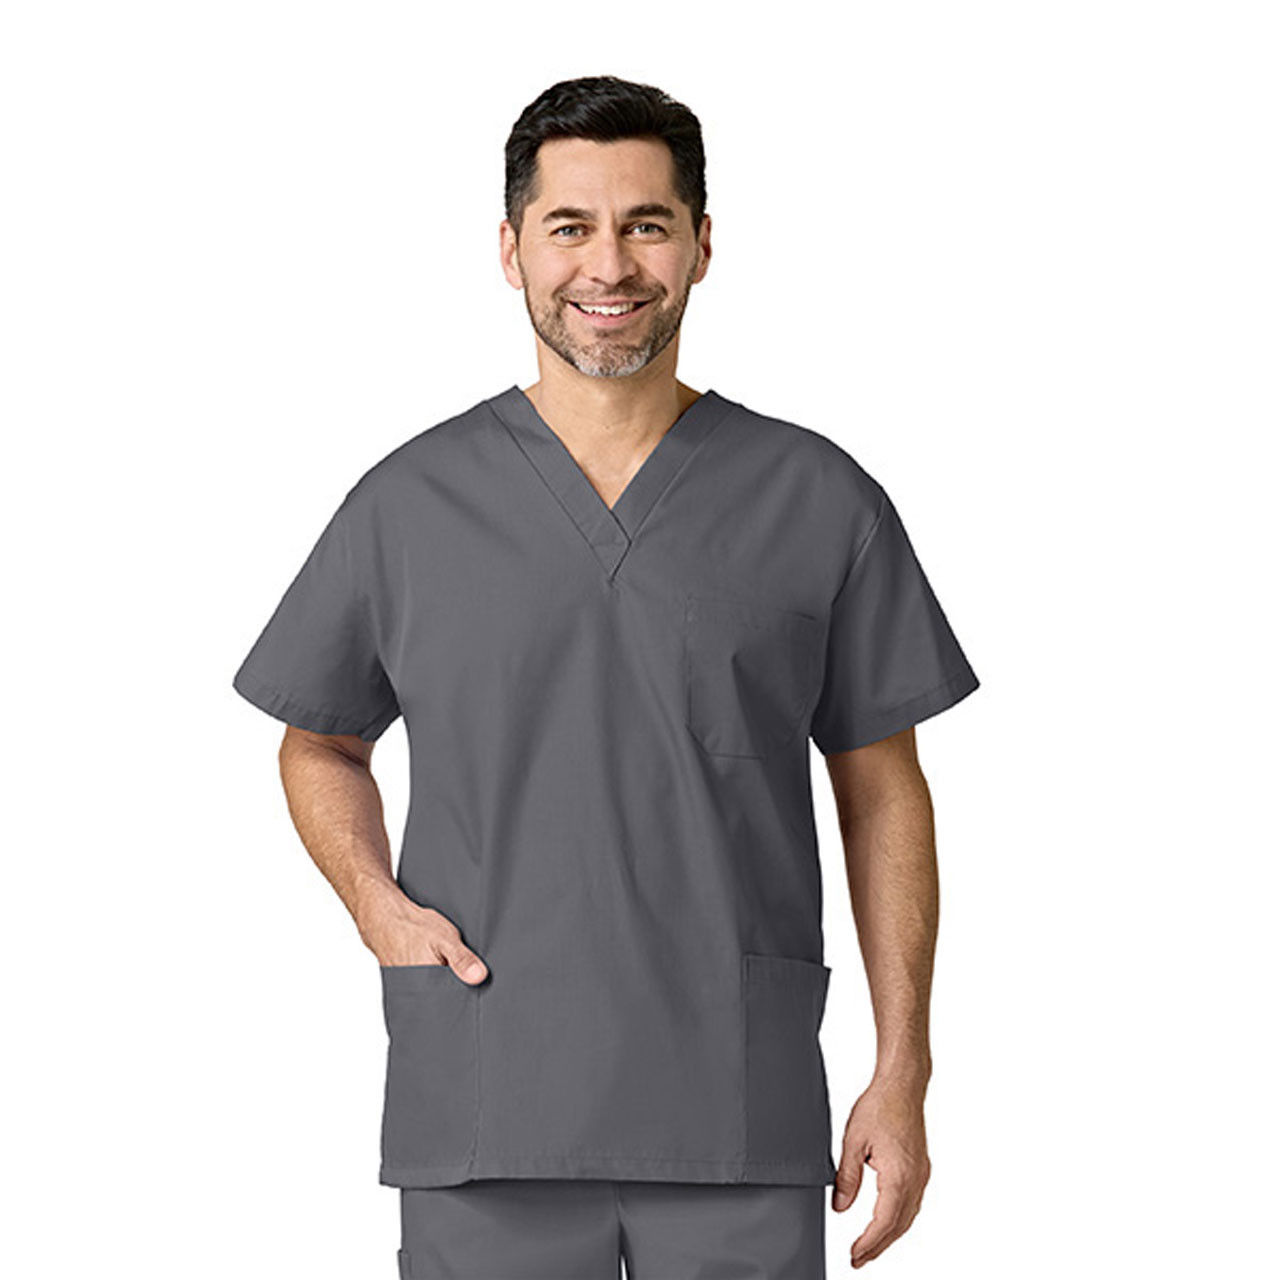 Where can the Fashion Seal Scrub Top be used?